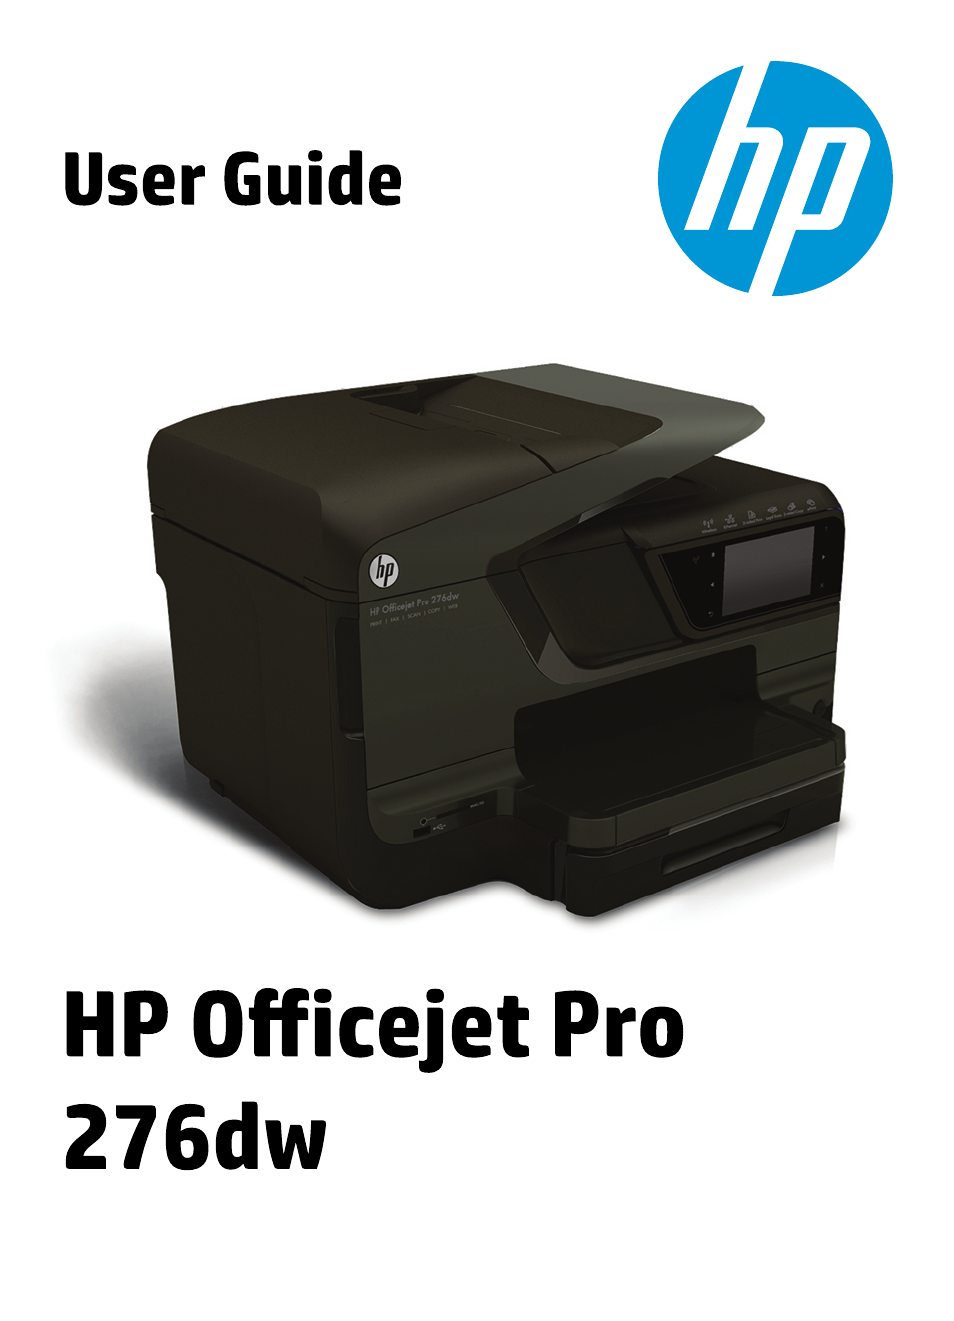 HP Officejet Pro 276dw Multifunction Printer series User Manual | 260 pages